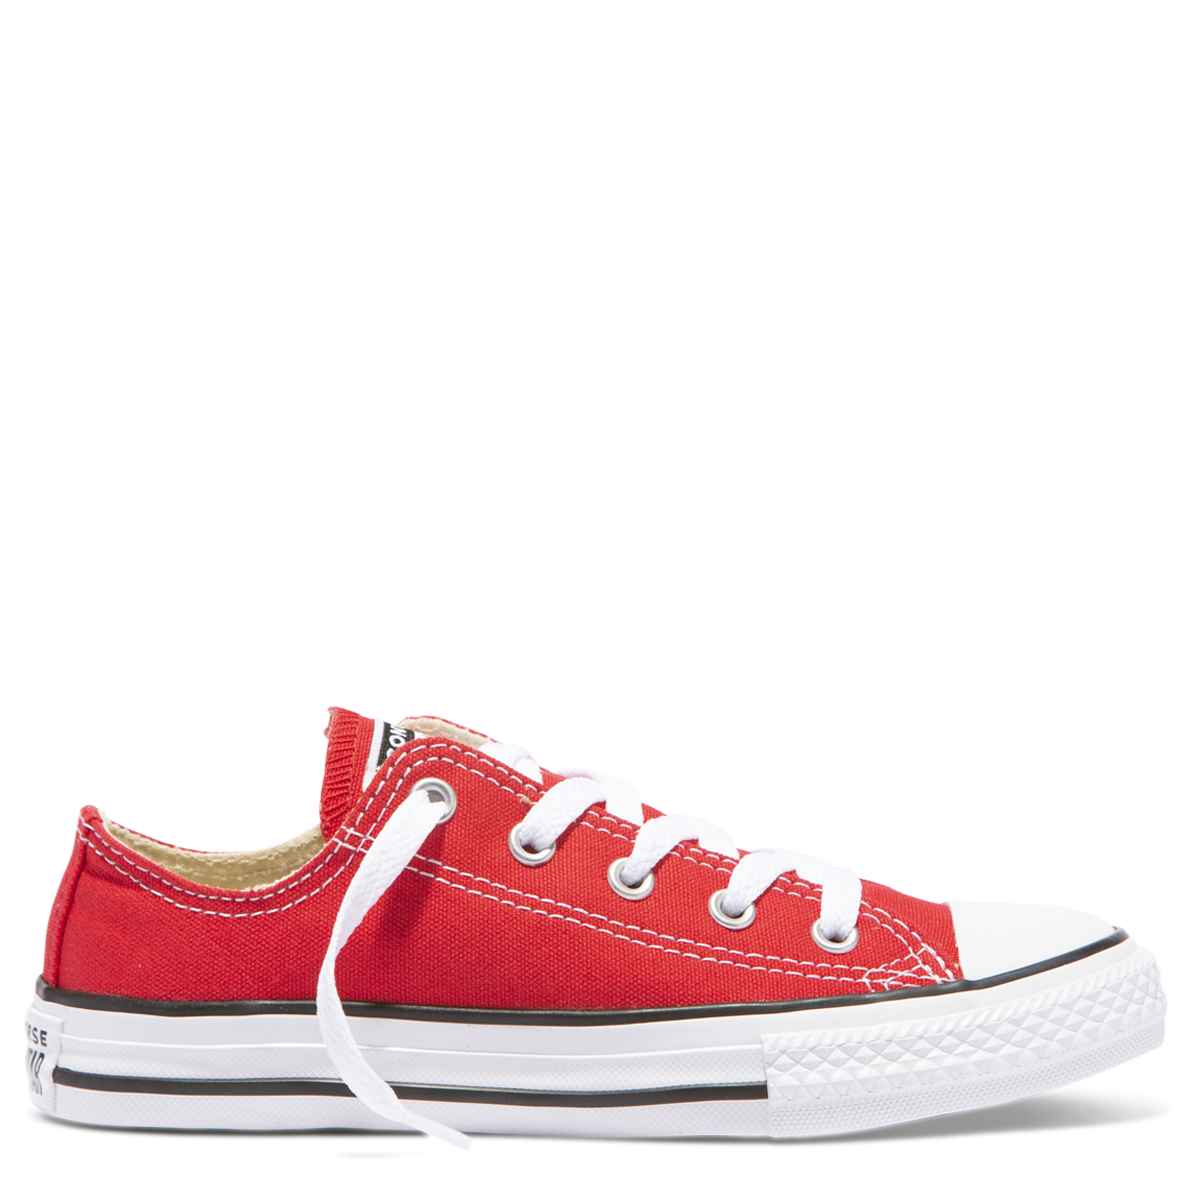 red converse size 4 junior